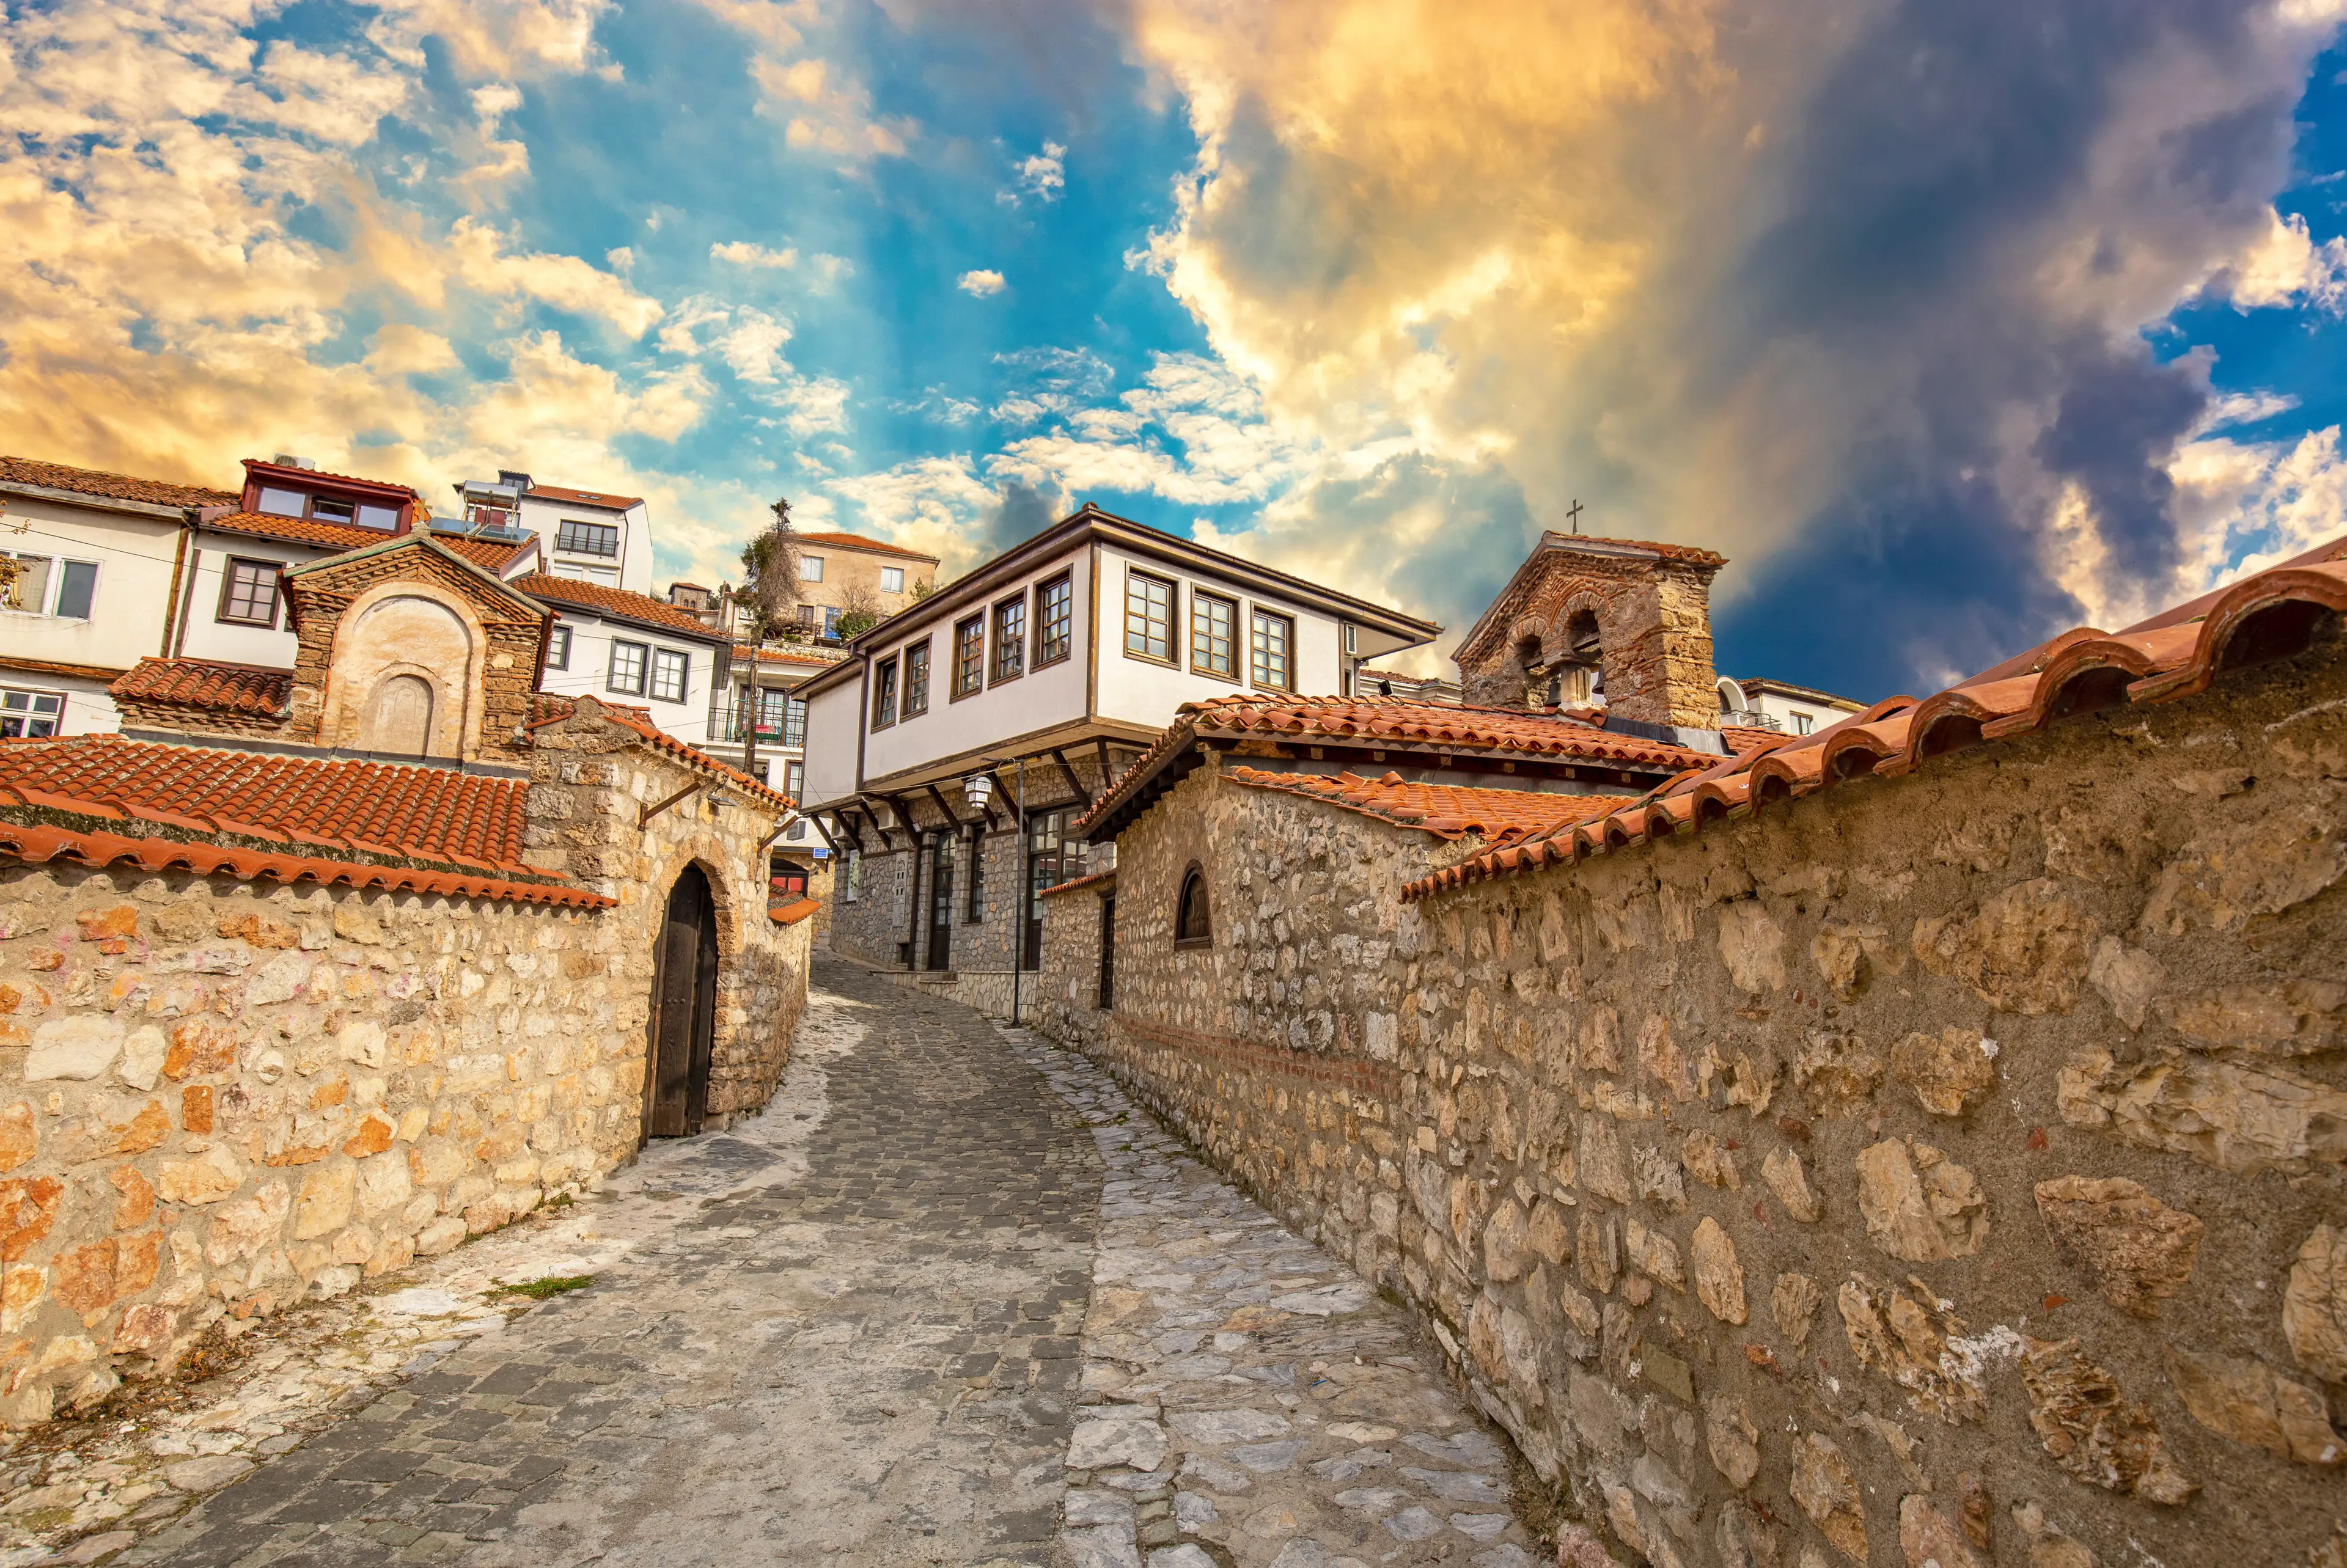 4-Day Ohrid Adventure: Local Experiences with Food, Wine & Sightseeing